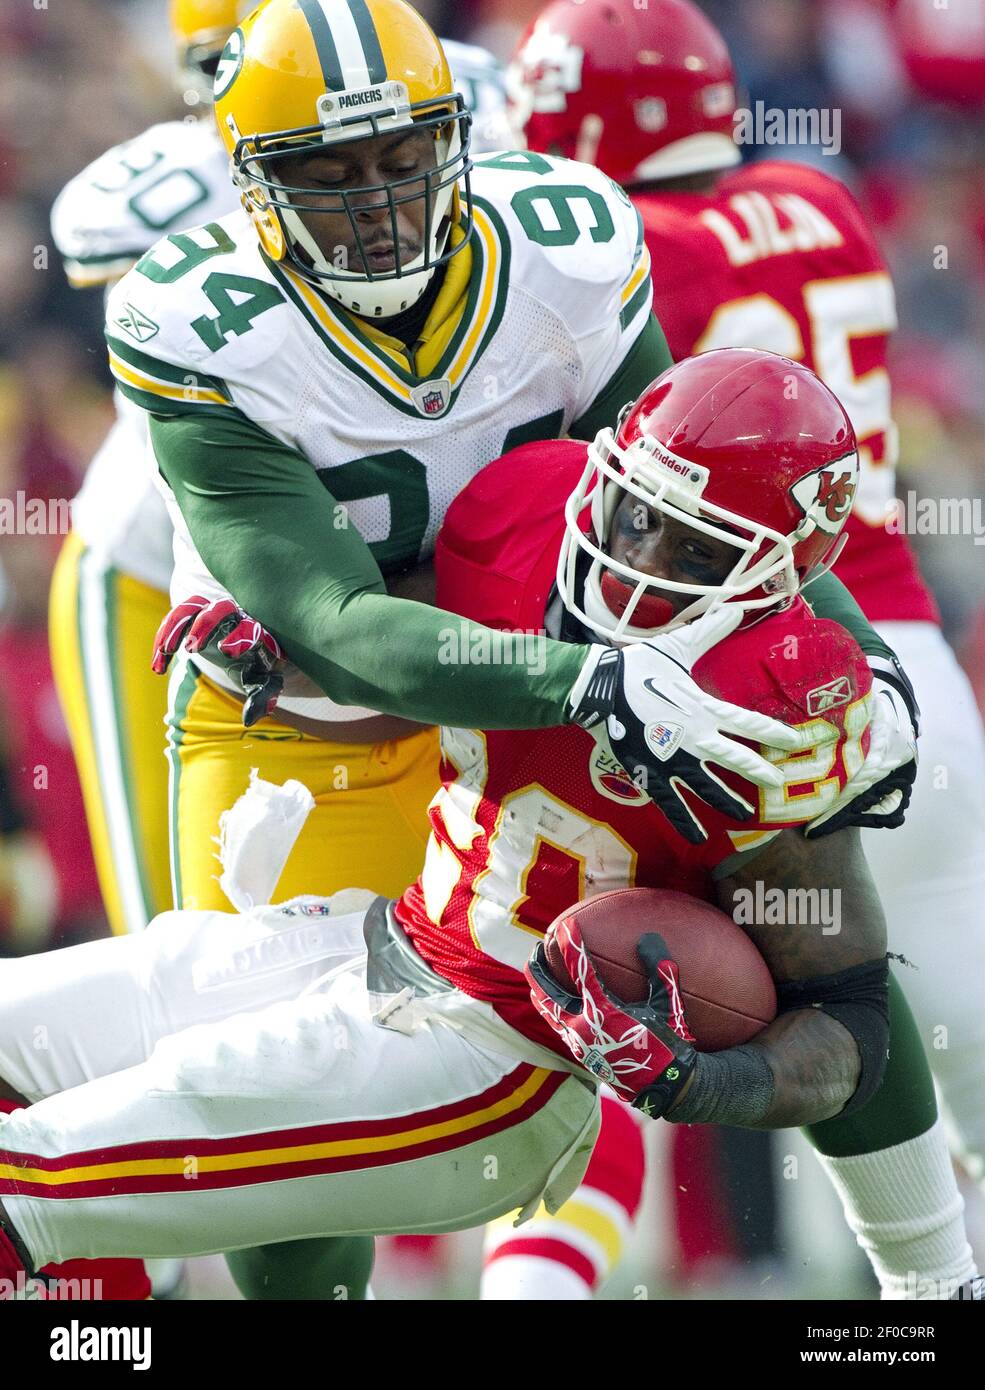 Green Bay Packers defensive end Jarius Wynn (94) stops Kansas City Chiefs  running back Thomas Jones (20) on a run in the third quarter during  Sunday's football game at Arrowhead Stadium on